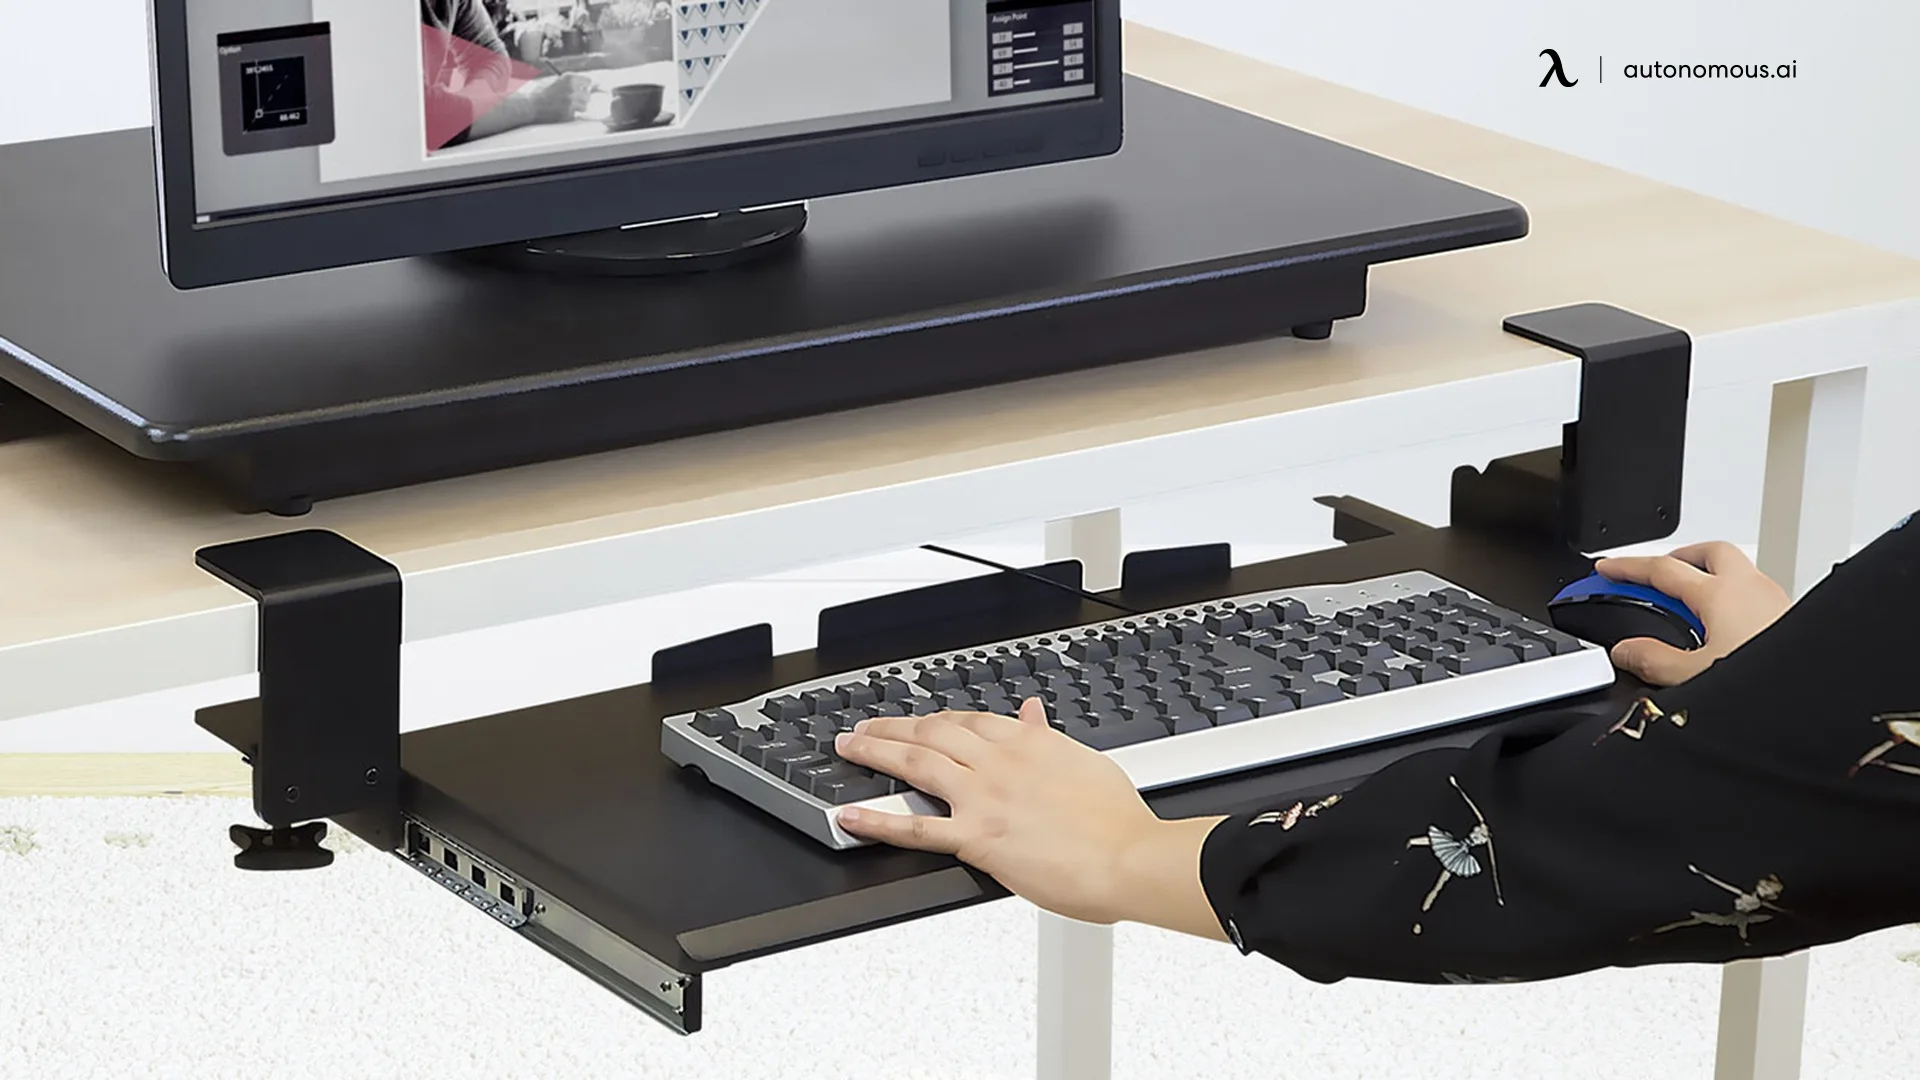 Mount-It! Glide Keyboard and Mouse Tray